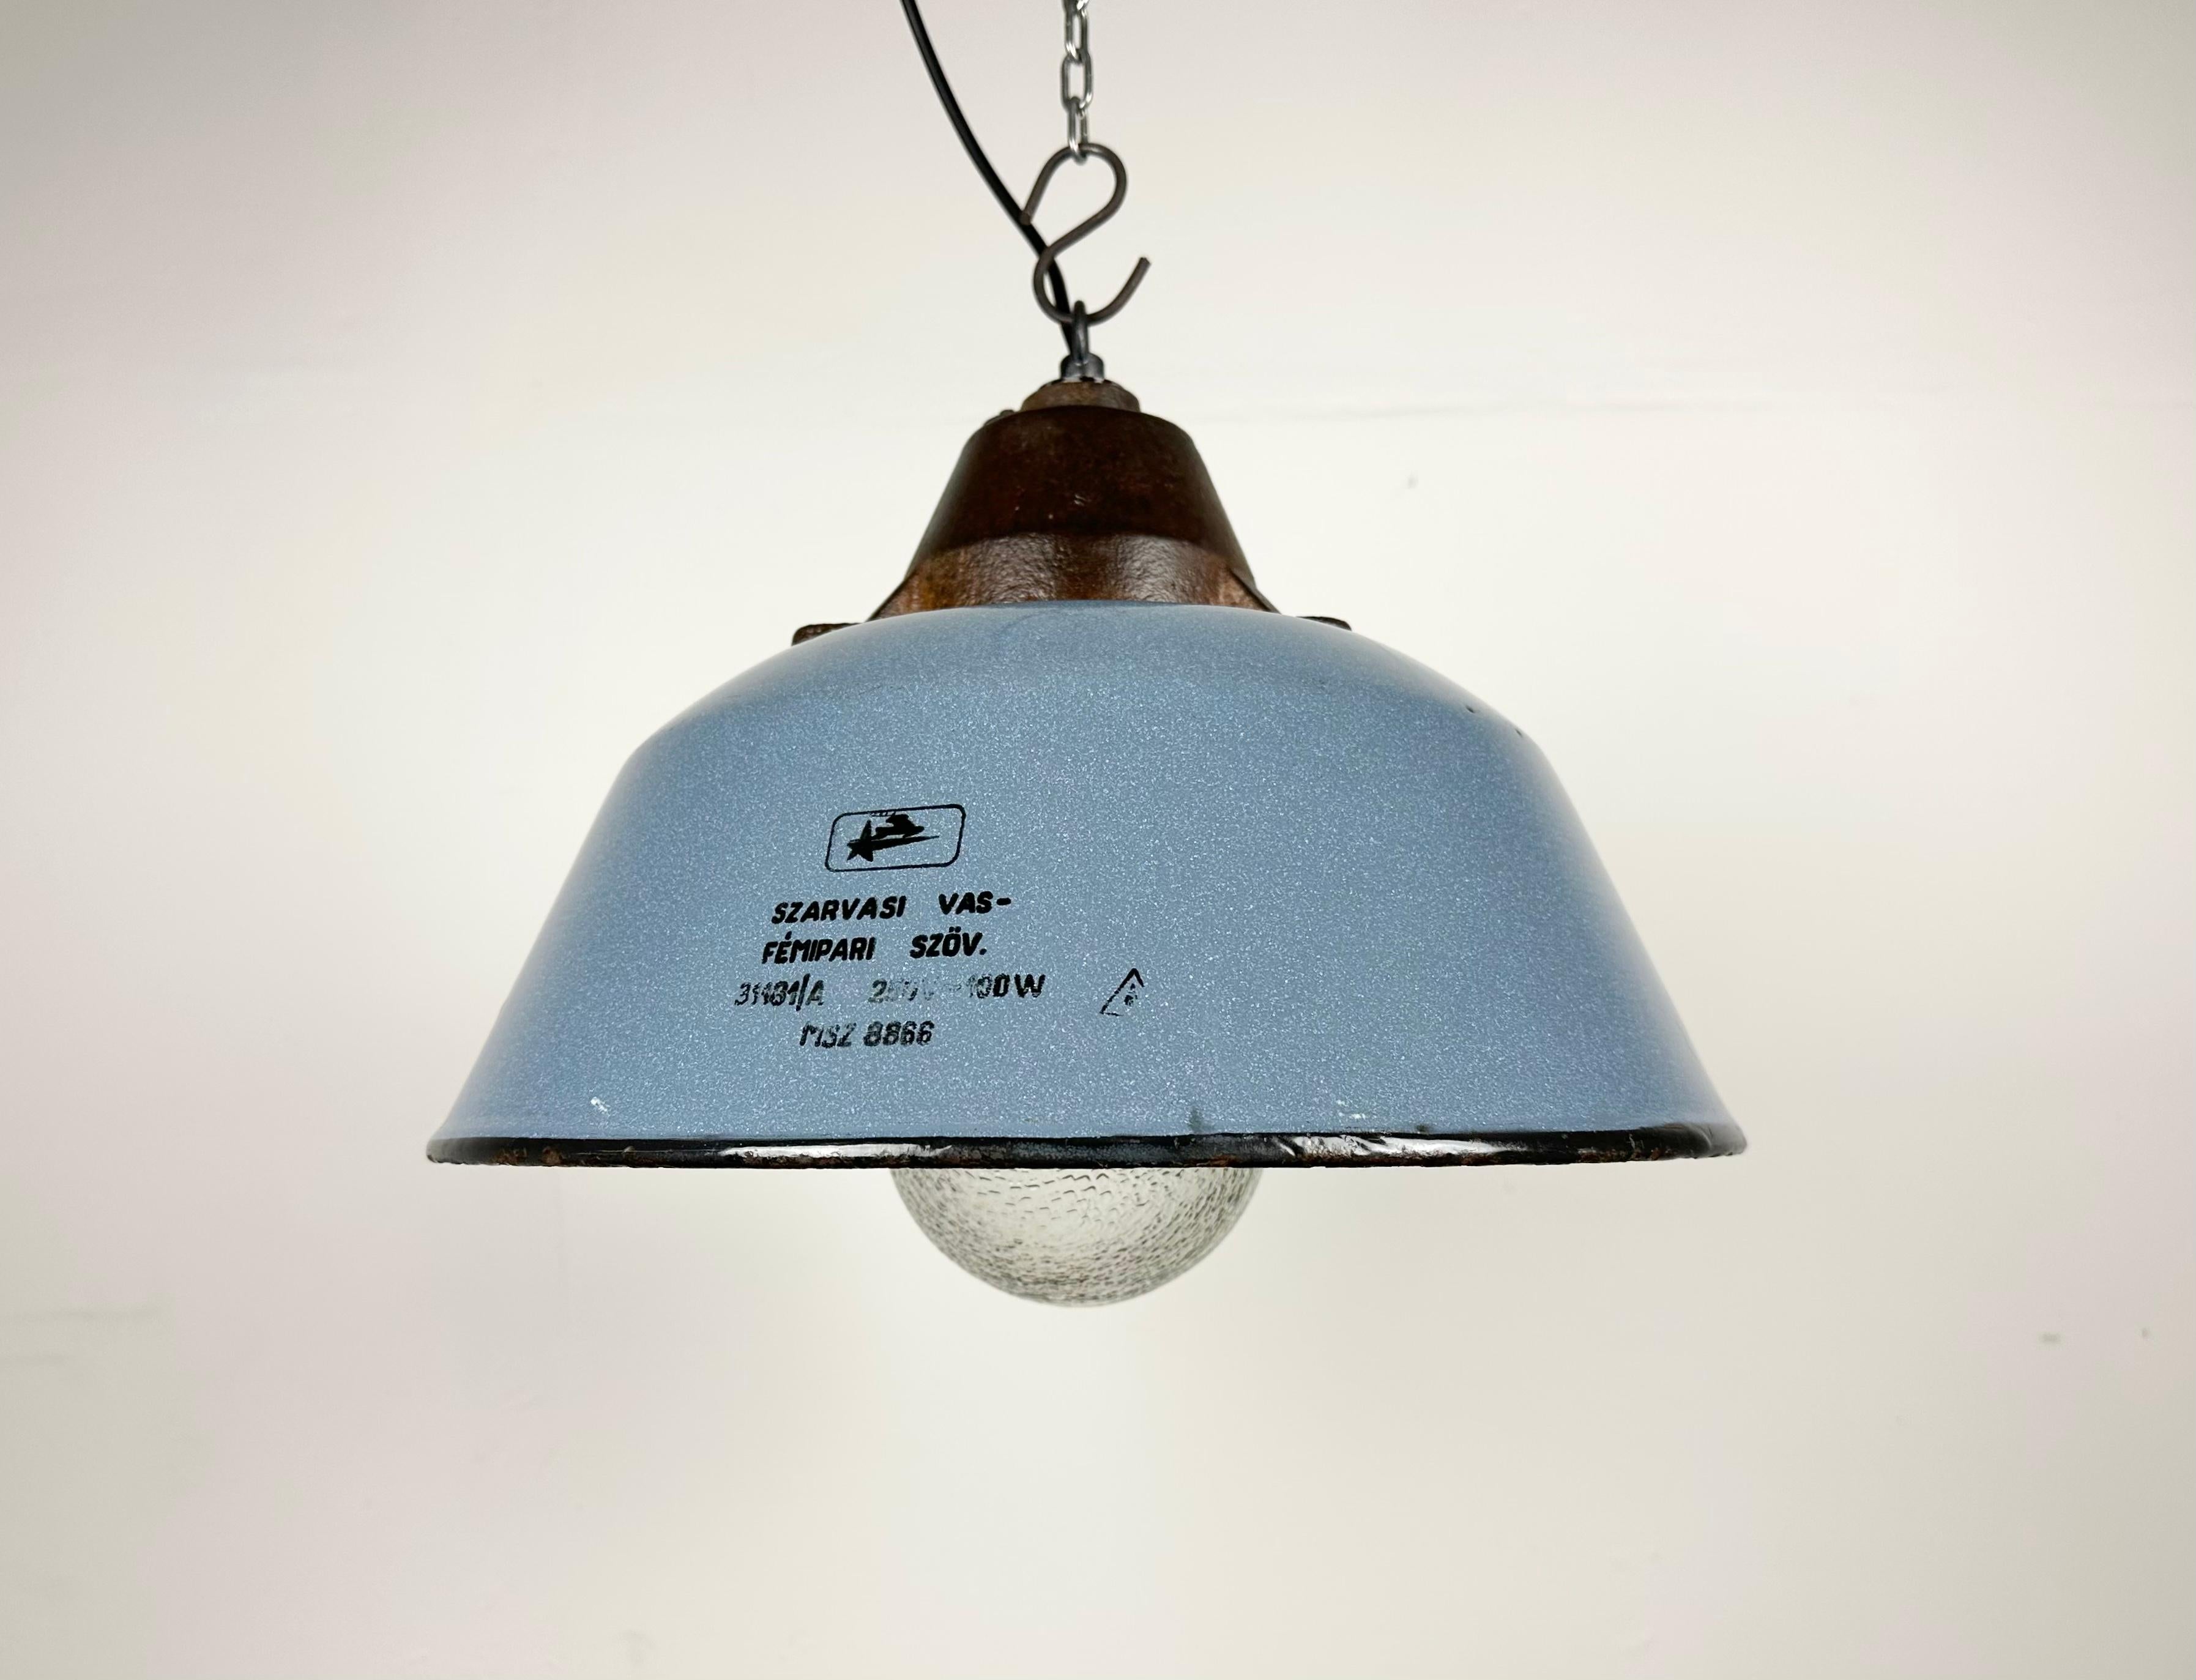 Industrial hanging lamp manufactured by Szarvasi Vas - Fém in Hungary during the 1960s. It features a grey enamel shade, a white enamel interior, a cast iron top and a frosted glass cover. New porcelain socket requires E 27/ E26 light bulbs. New